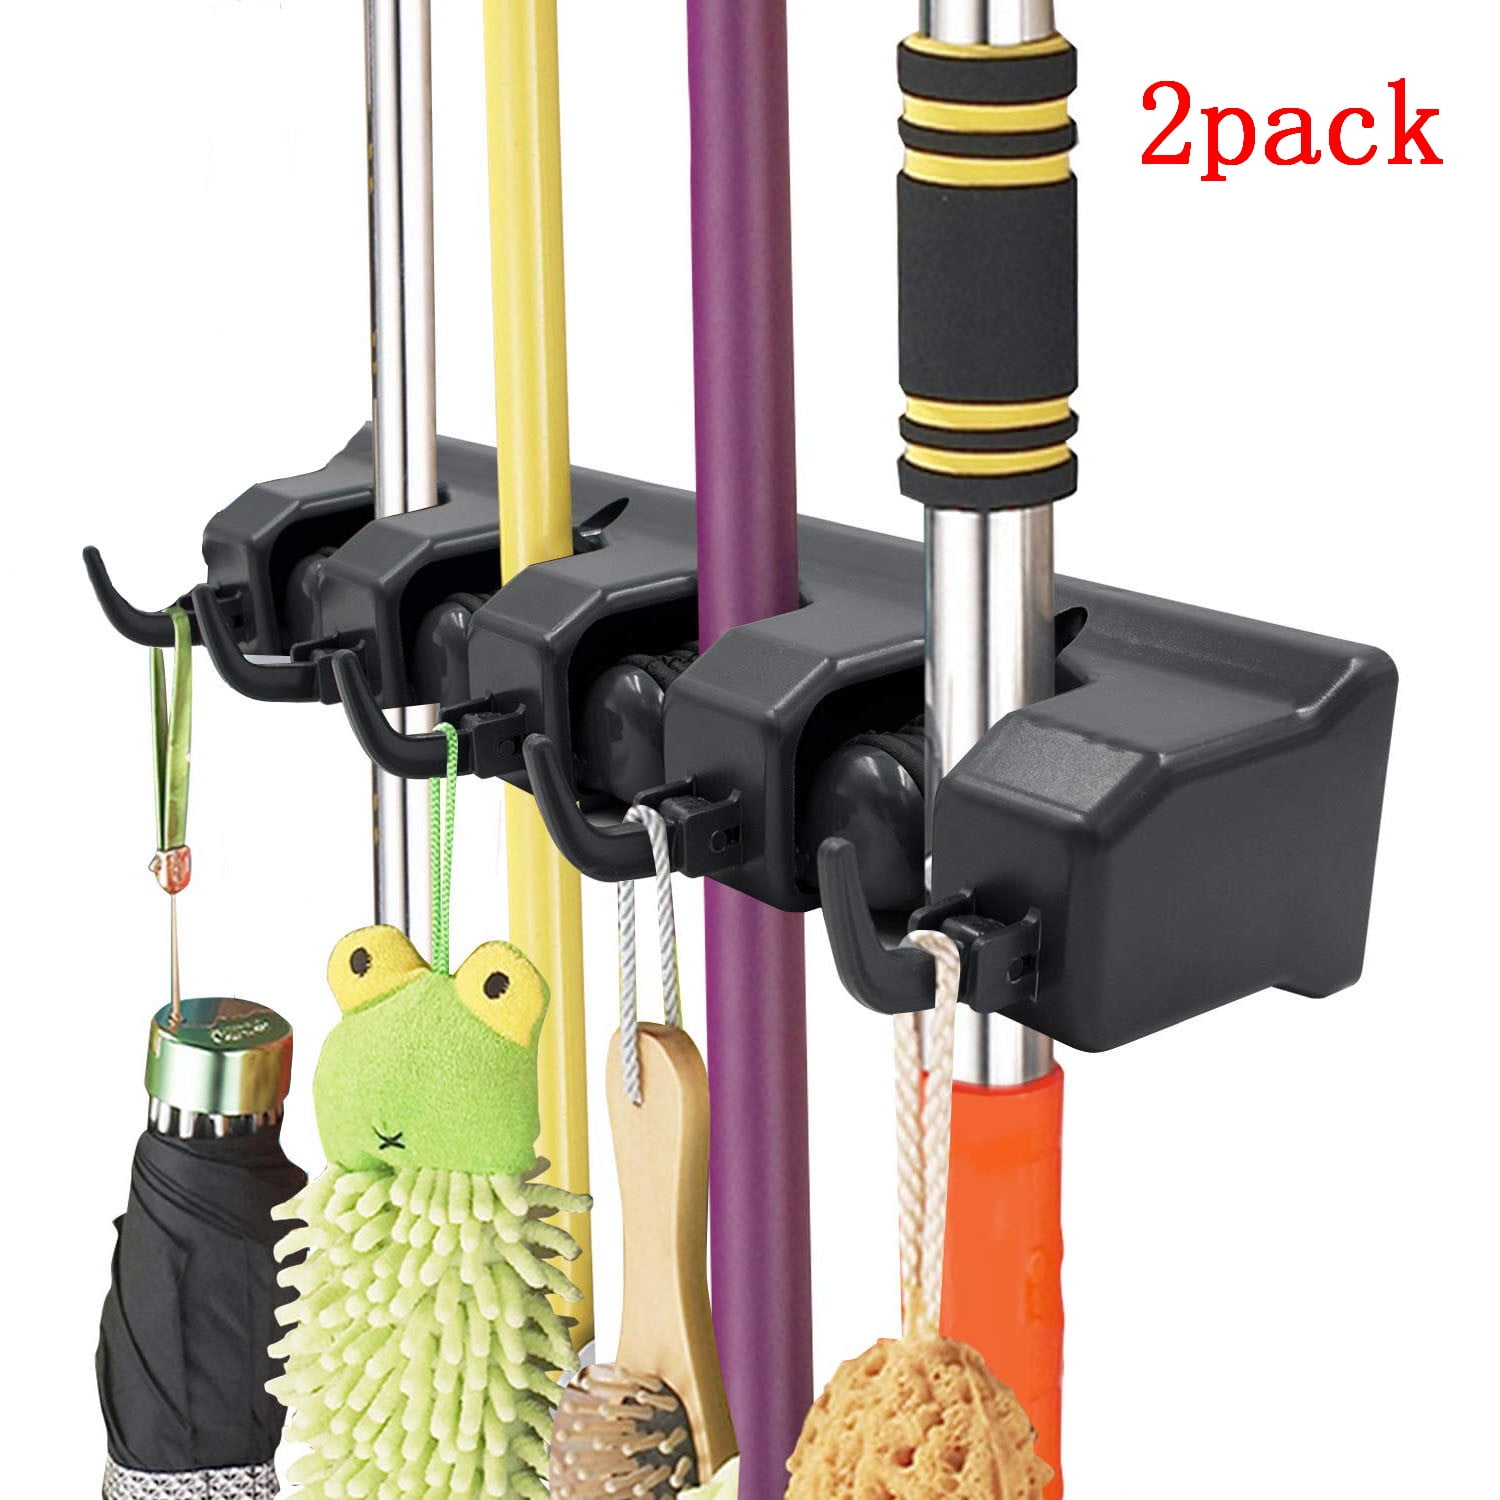 Broom Holder Clip Grip for Kitchen Mops Brushes Brooms handle holding many sizes 